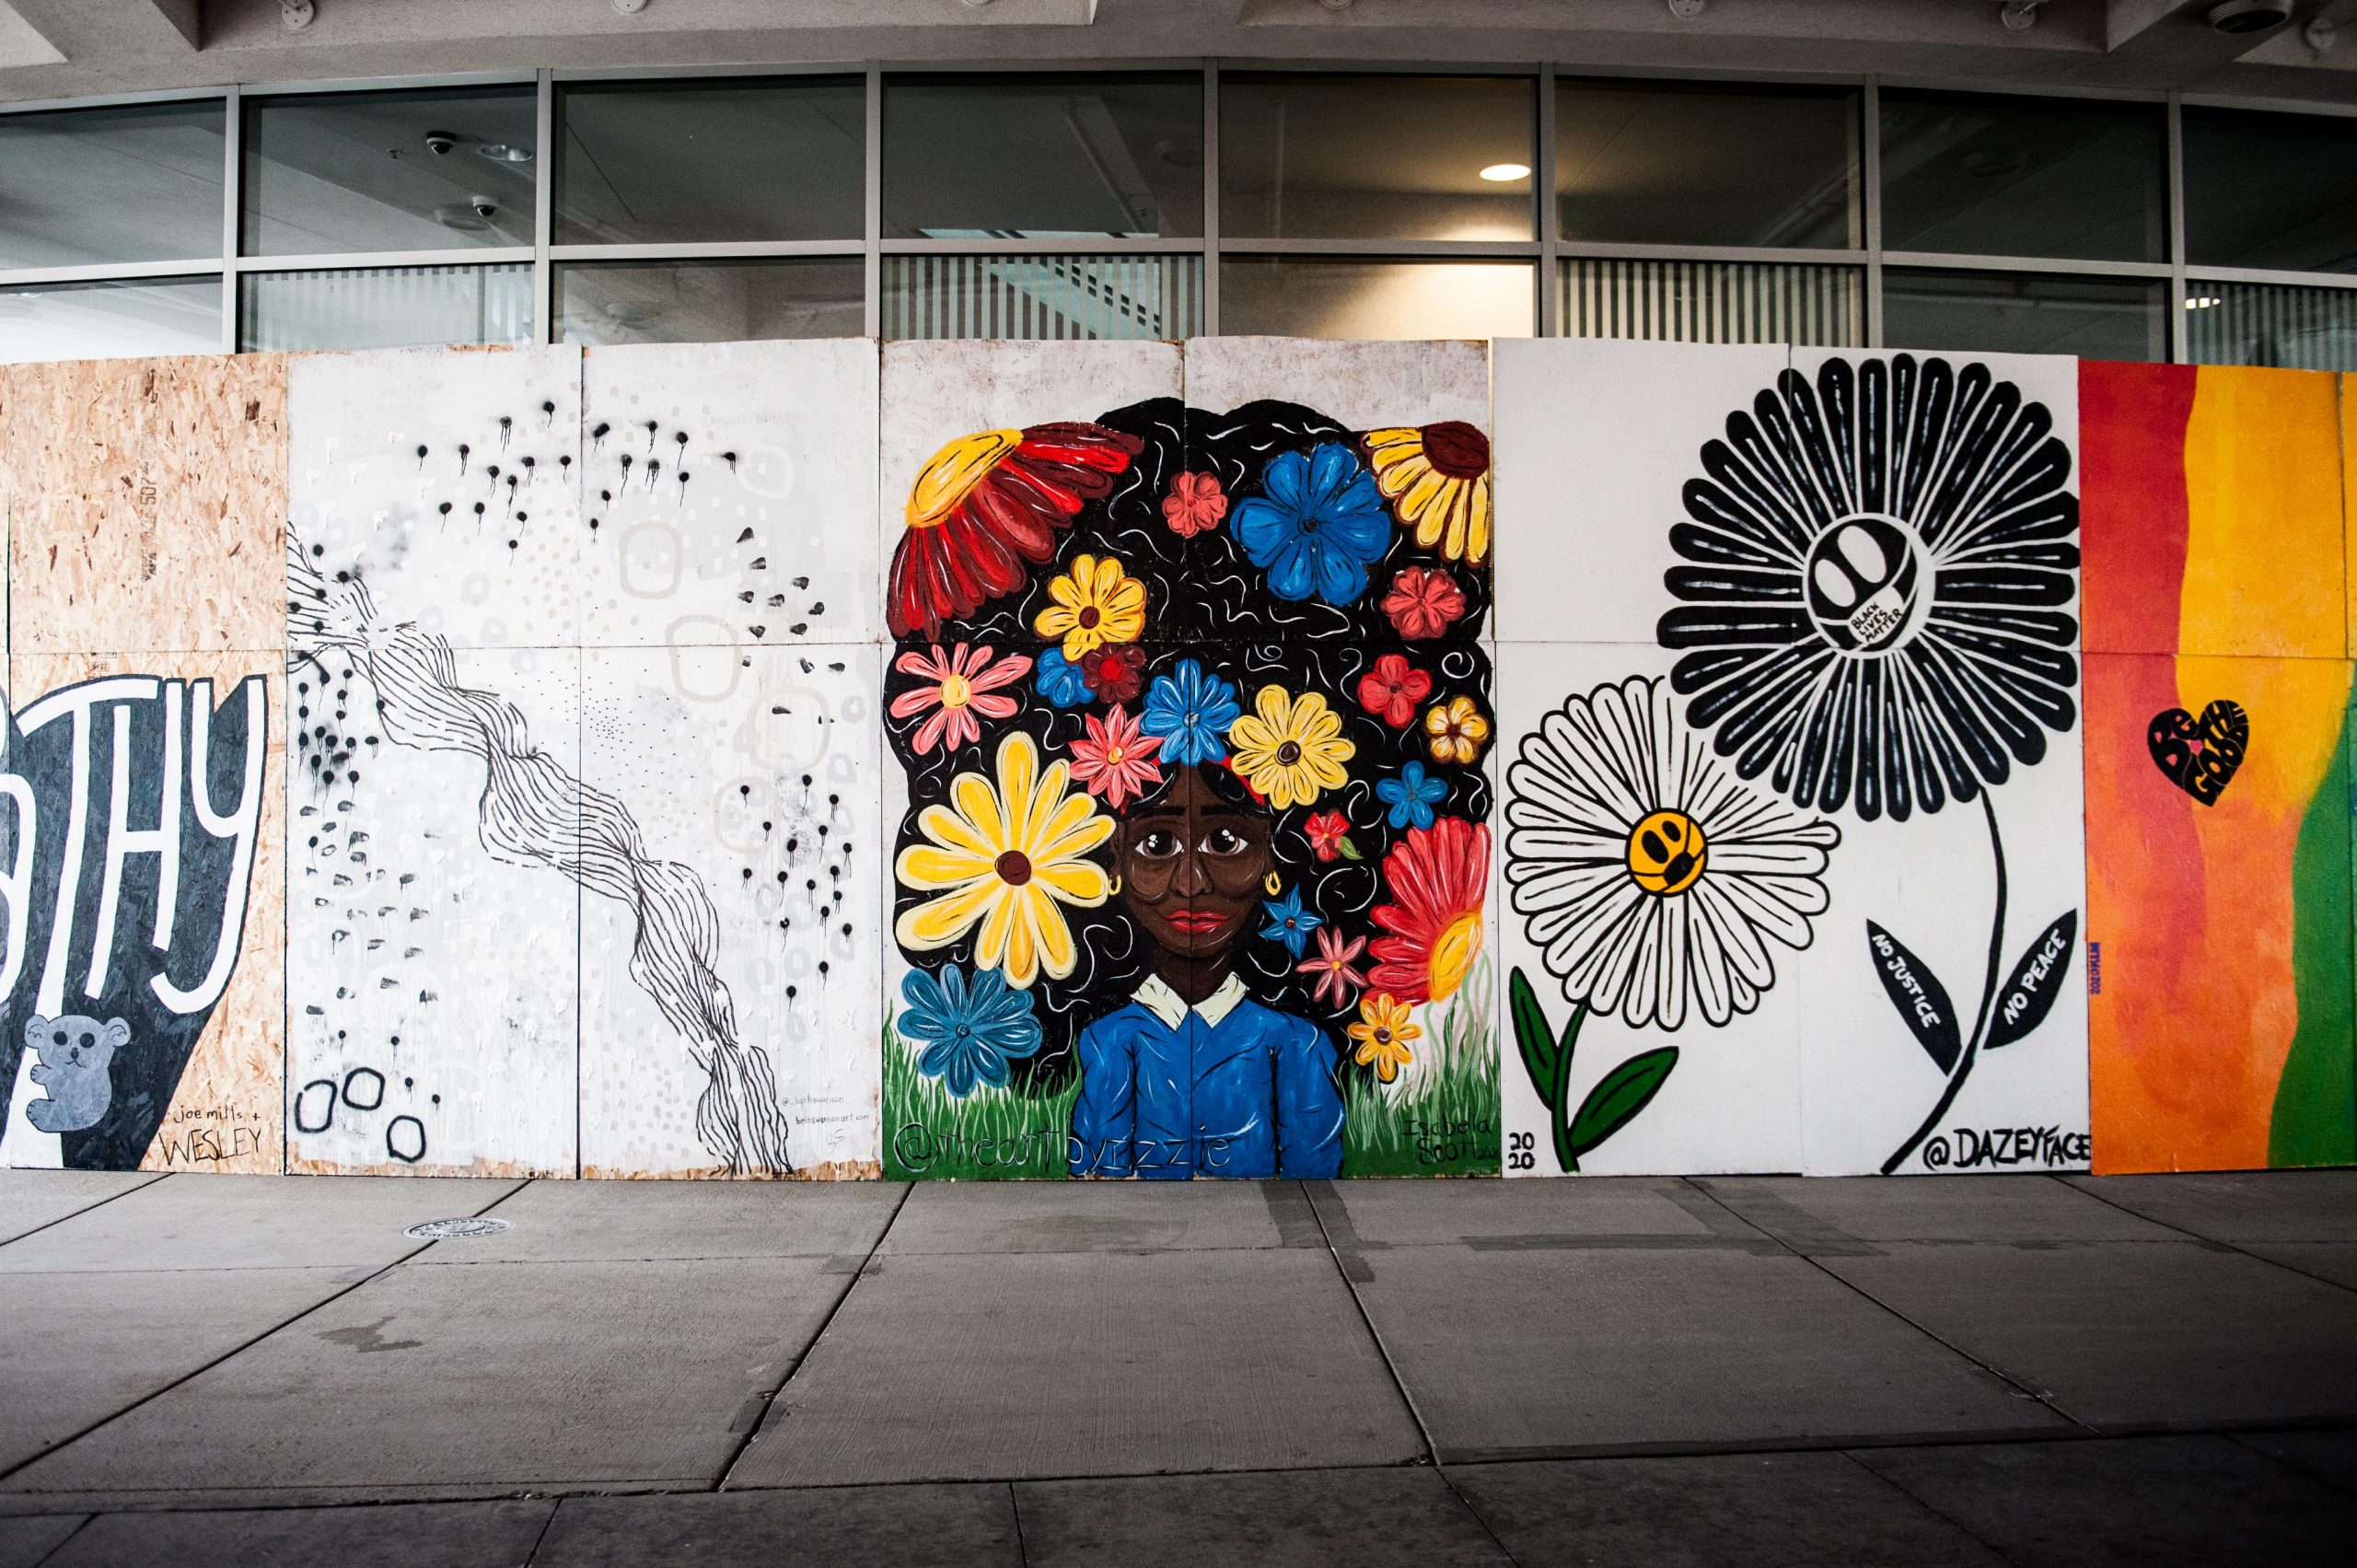 Photo of three board murals. Left one is an abstract painting in black, grey and white. Middle painting is of a black woman with large hair filled with colorful flowers. Right painting is of two daisies, one is wearing a mask and one is painted all black and says "Black Lives Matter" in the center and "No Justice" and "No Peace" on its leaves.